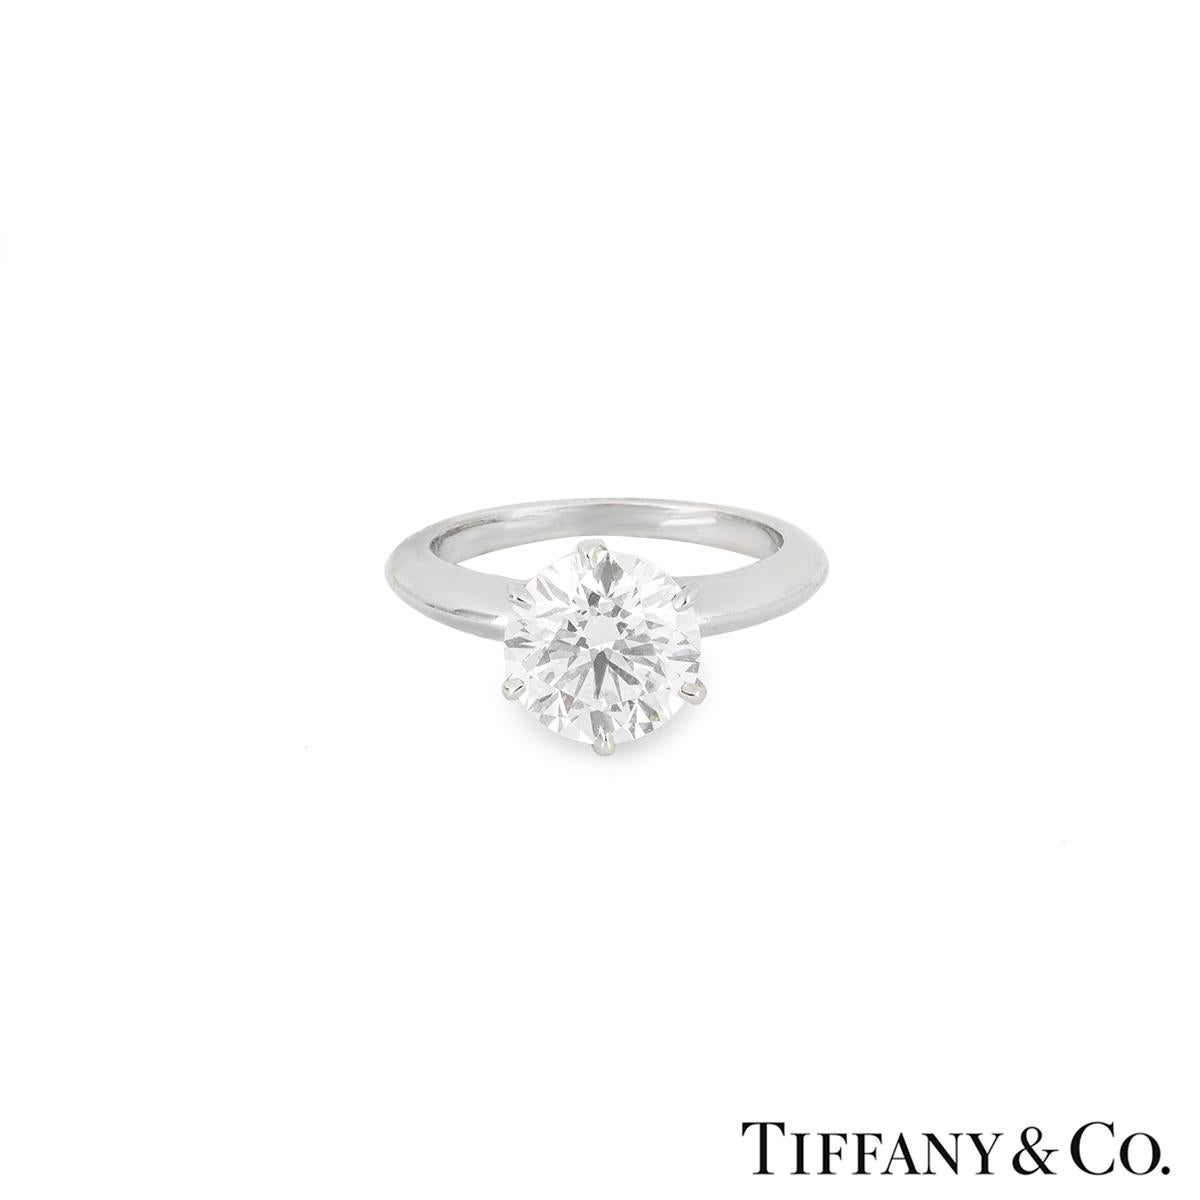 Tiffany & Co. Platinum Diamond Setting Engagement Ring 2.13ct H/VVS1 GIA Cert In Excellent Condition For Sale In London, GB